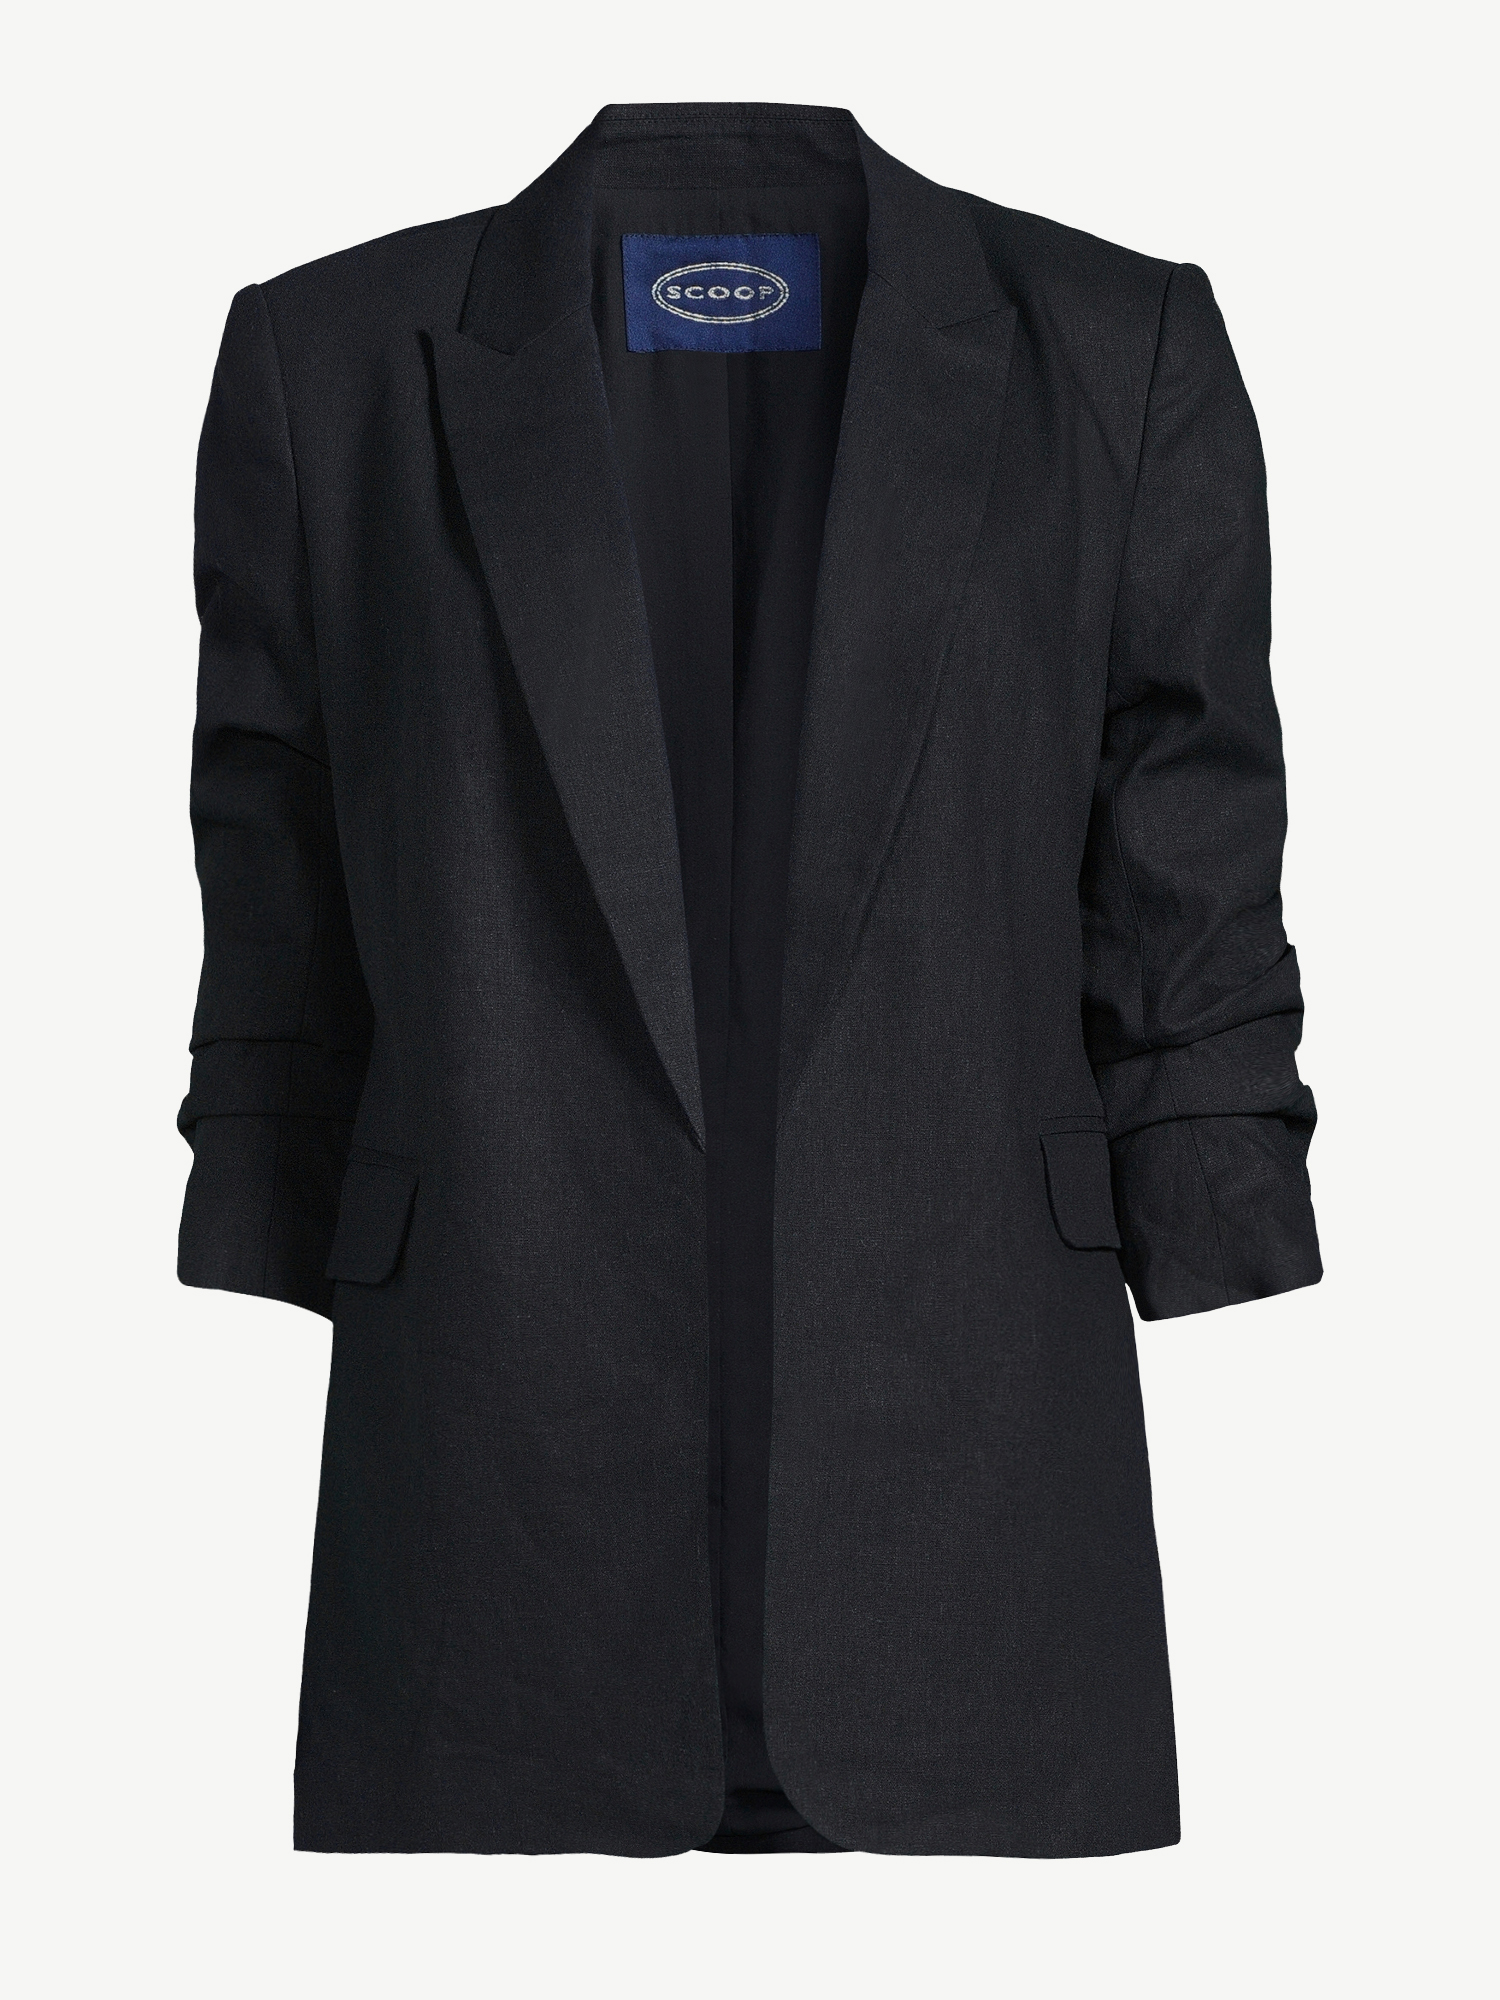 Scoop Women's Linen-Blend Open Front Blazer with Tie Back and 3/4 Scrunch Sleeves - image 2 of 5